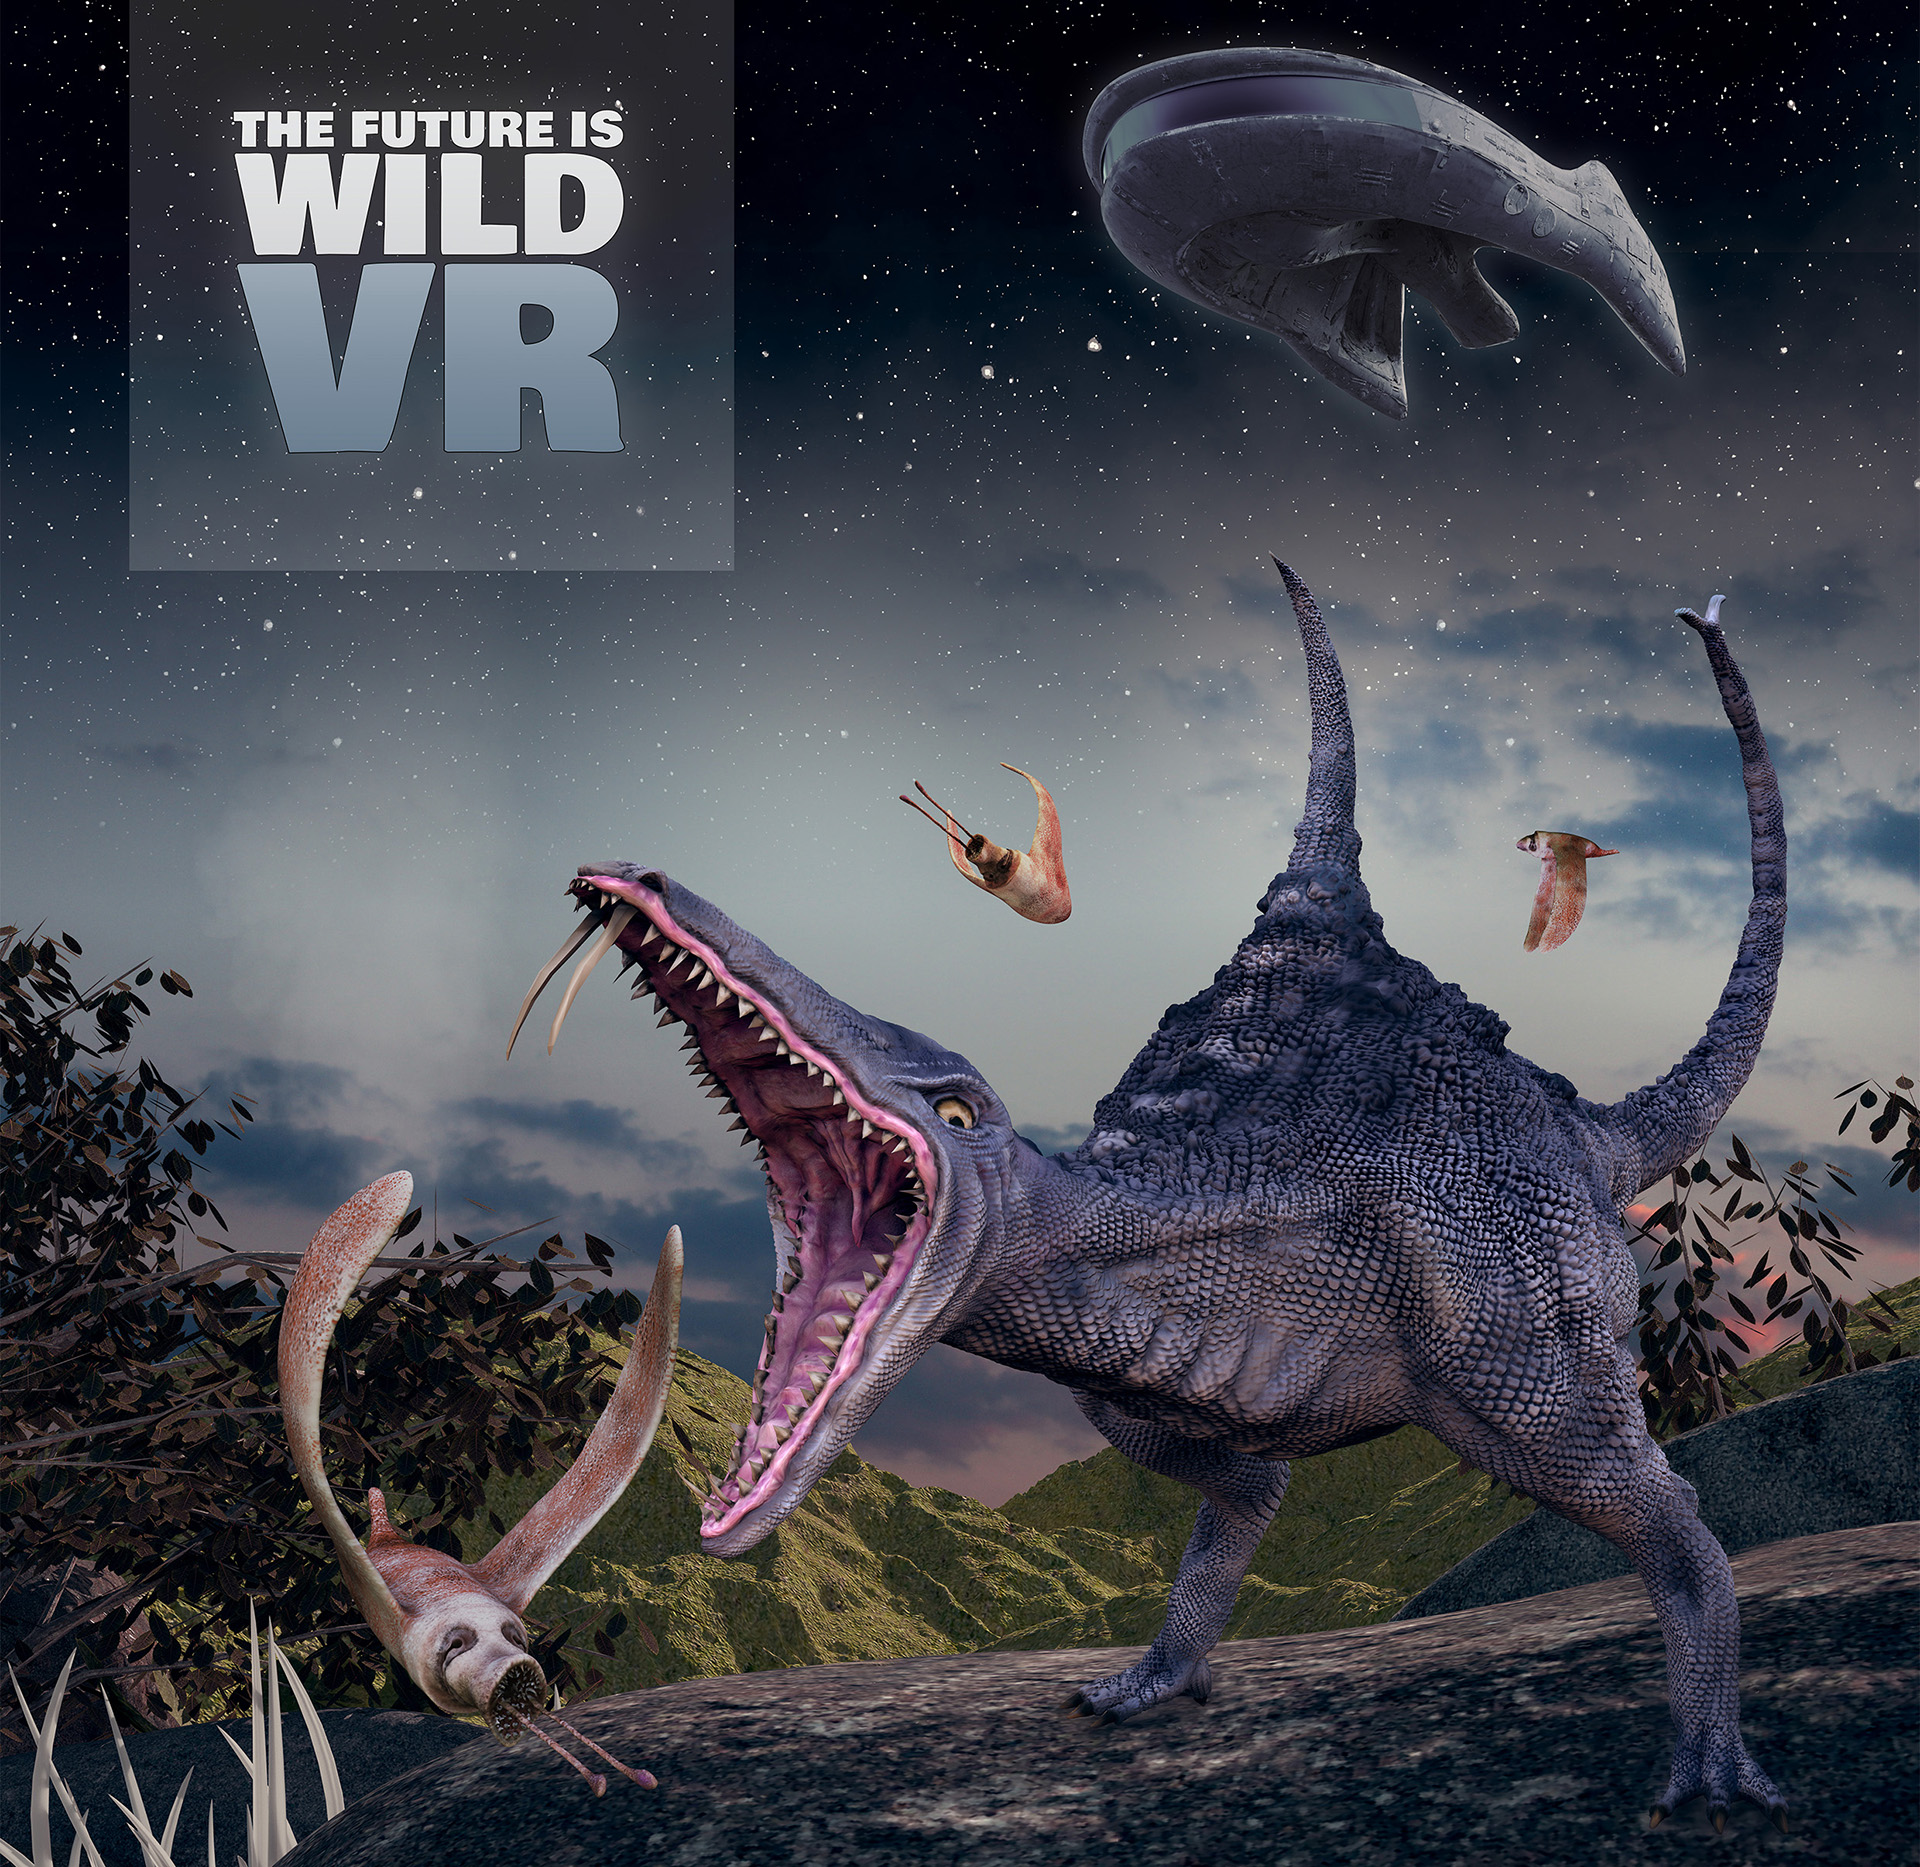 https://static.wikia.nocookie.net/the-future-is-wild/images/a/a0/The_Future_Is_Wild_VR.jpg